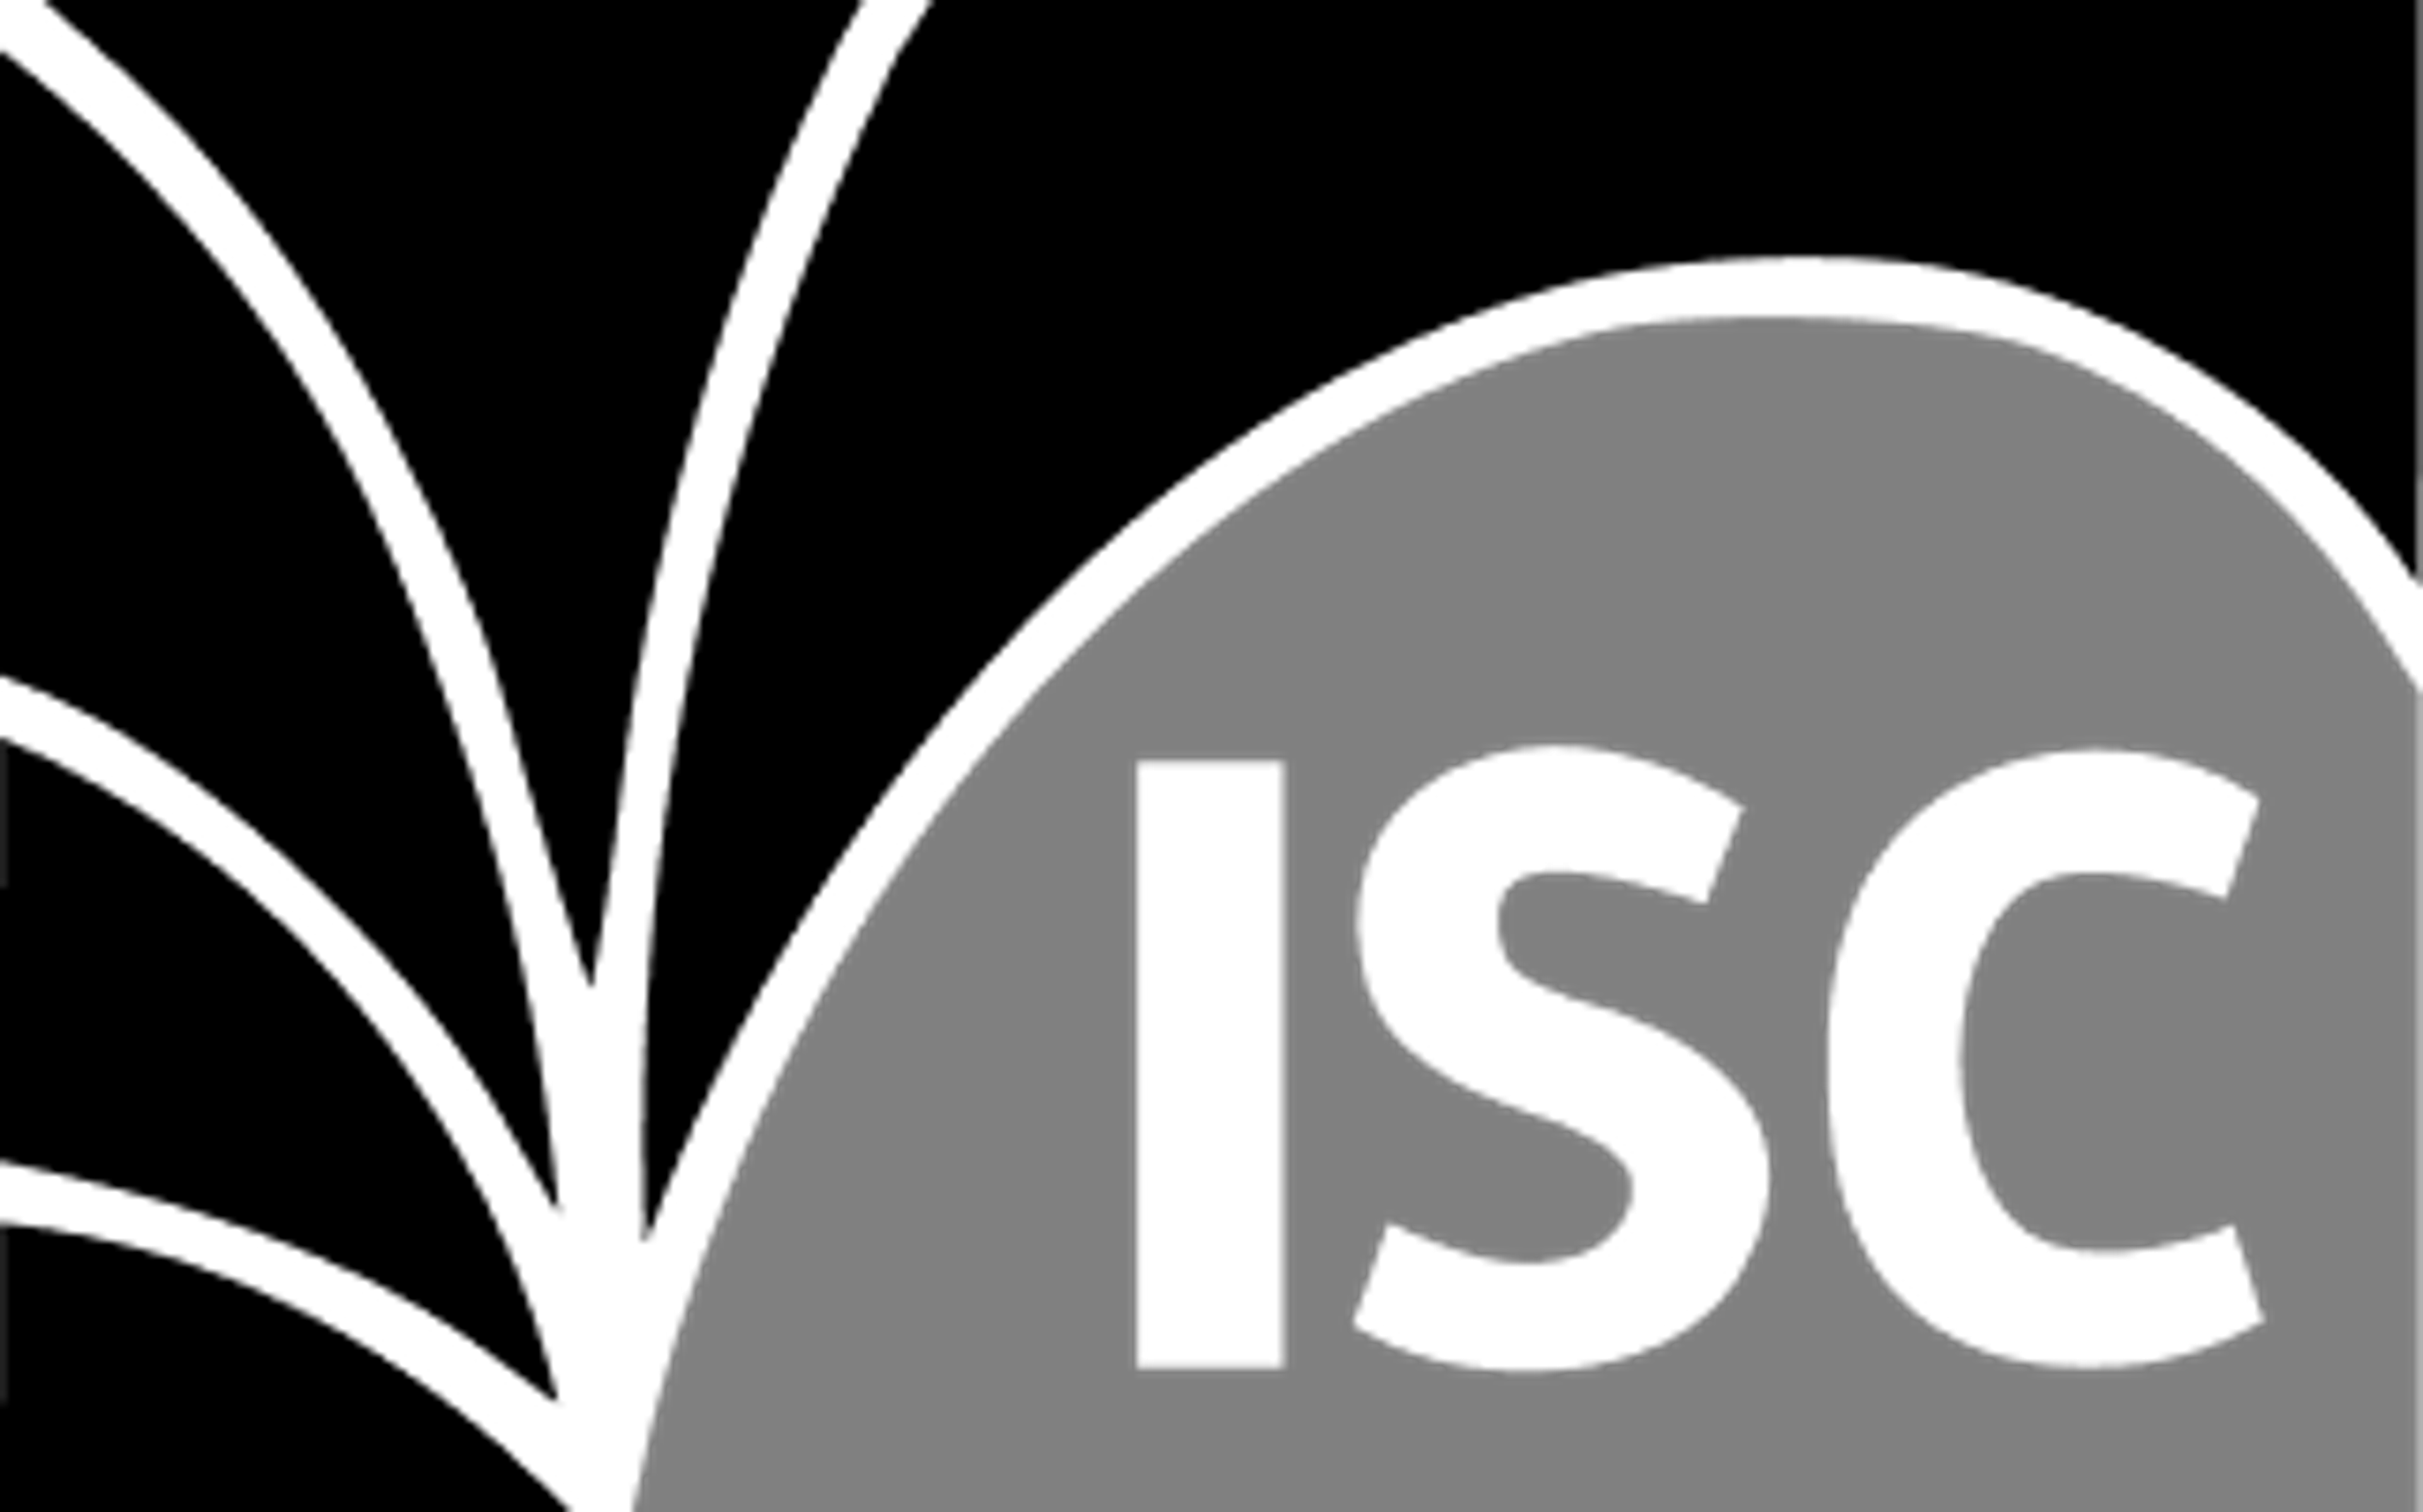 ISC logo positioned next to the quote from the customer